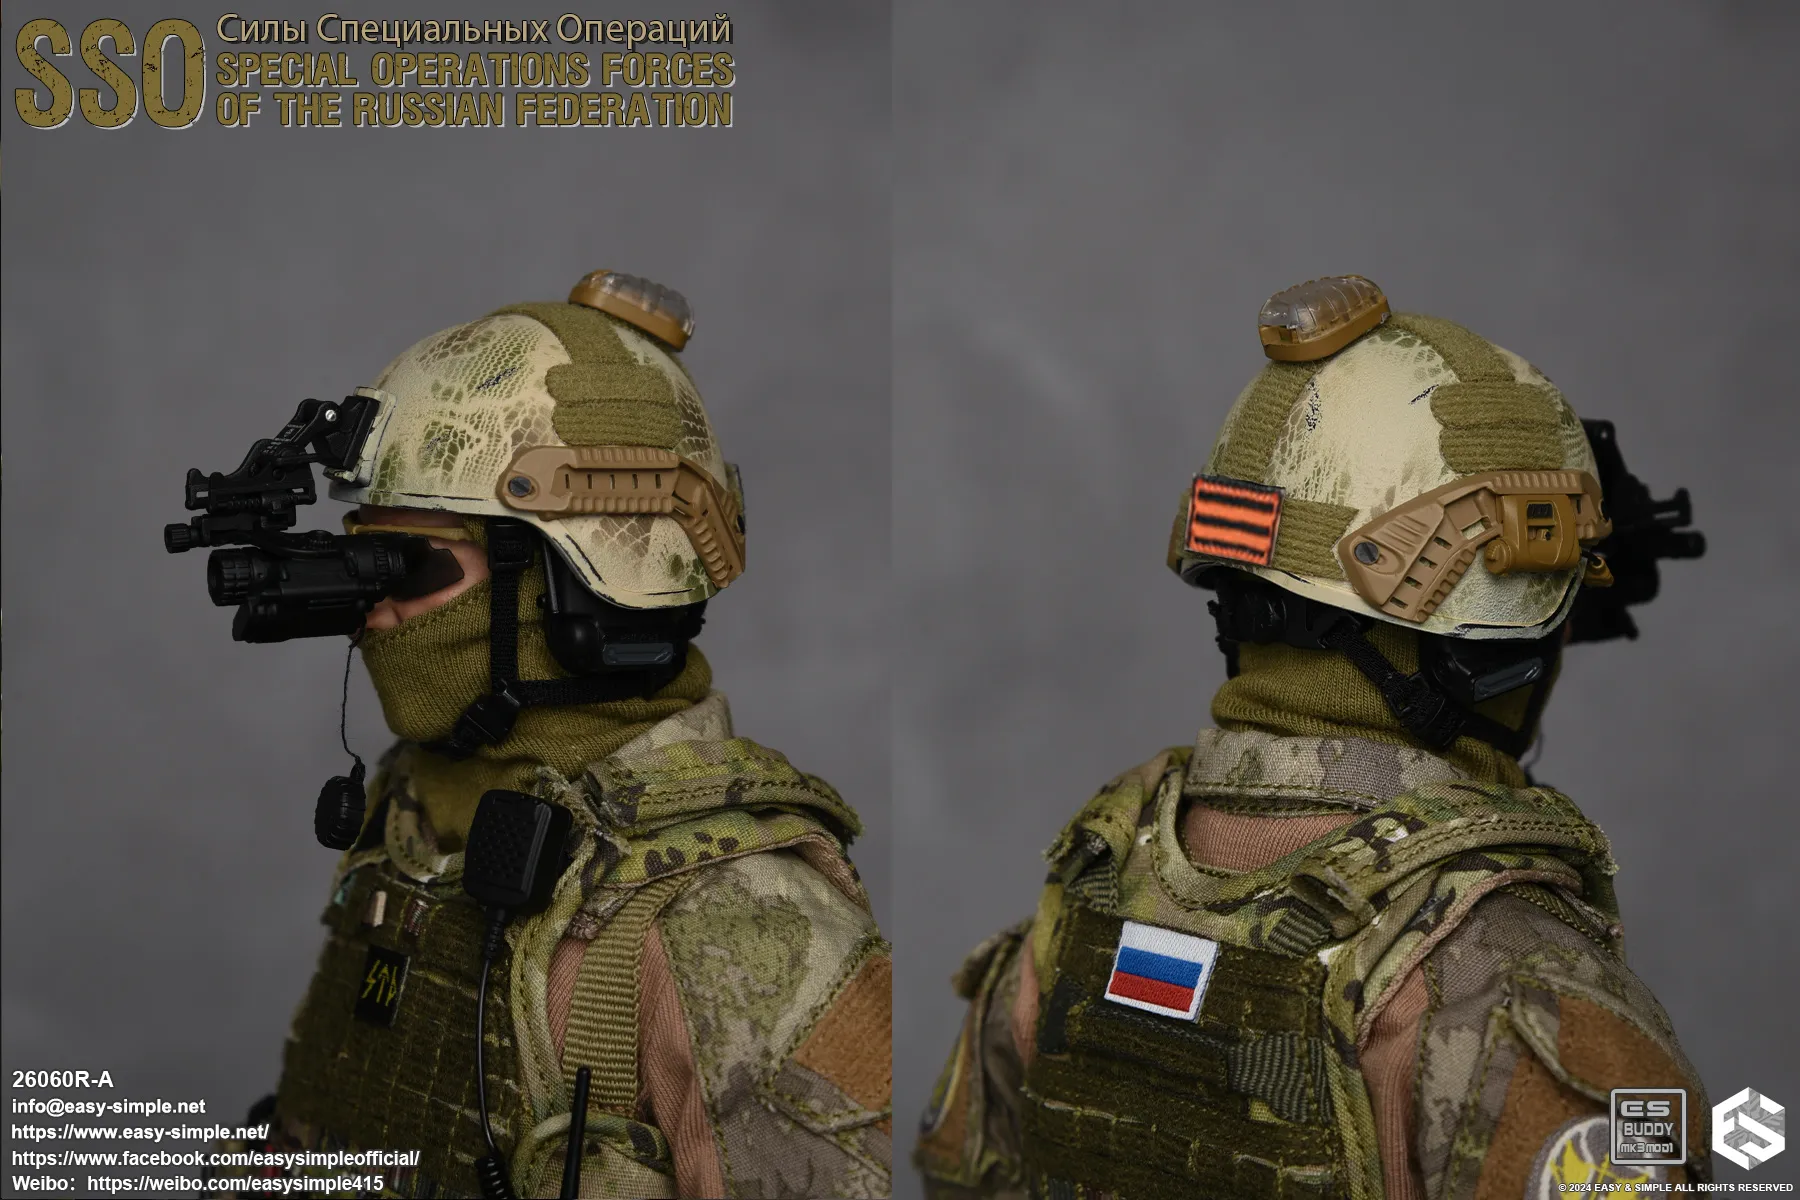 special - NEW PRODUCT: Easy&Simple 26060R-A Russian Special Operations Forces (SSO) Format,webp